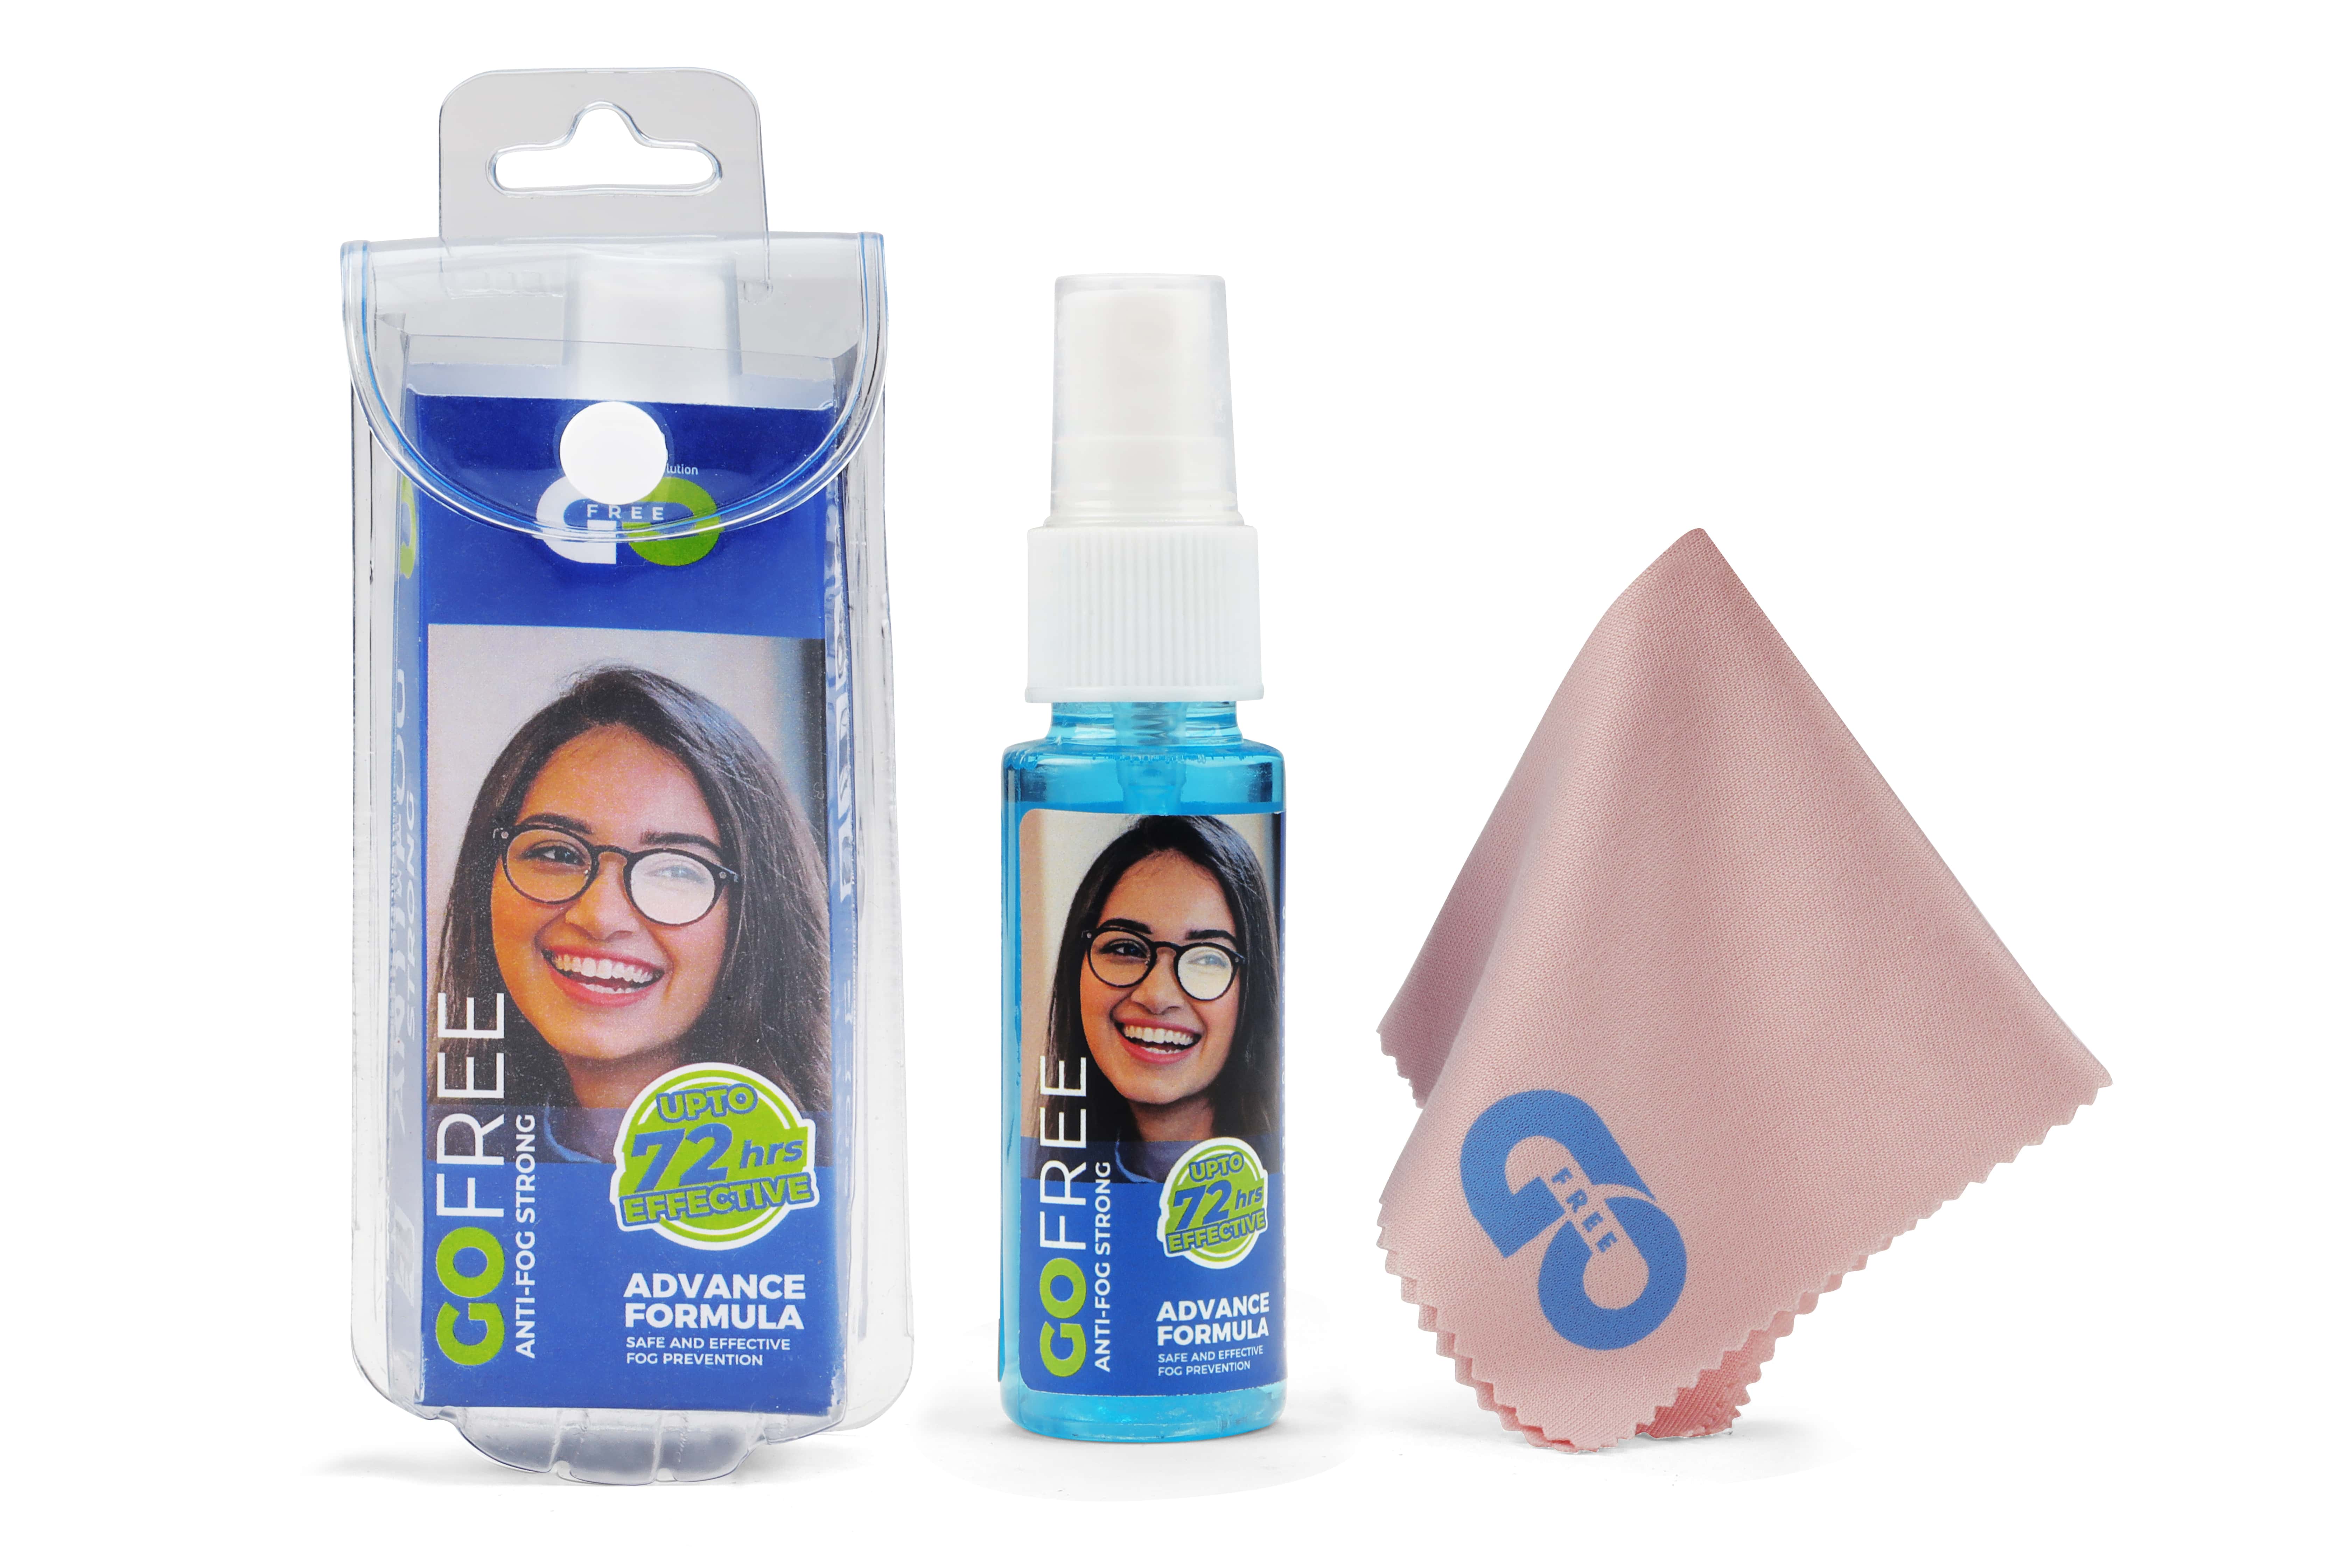 Anti-Fog Solution Strong (30 ML) - Effective for up to 72 Hrs. Ideal for Spectacles, Sunglasses & Eyewear